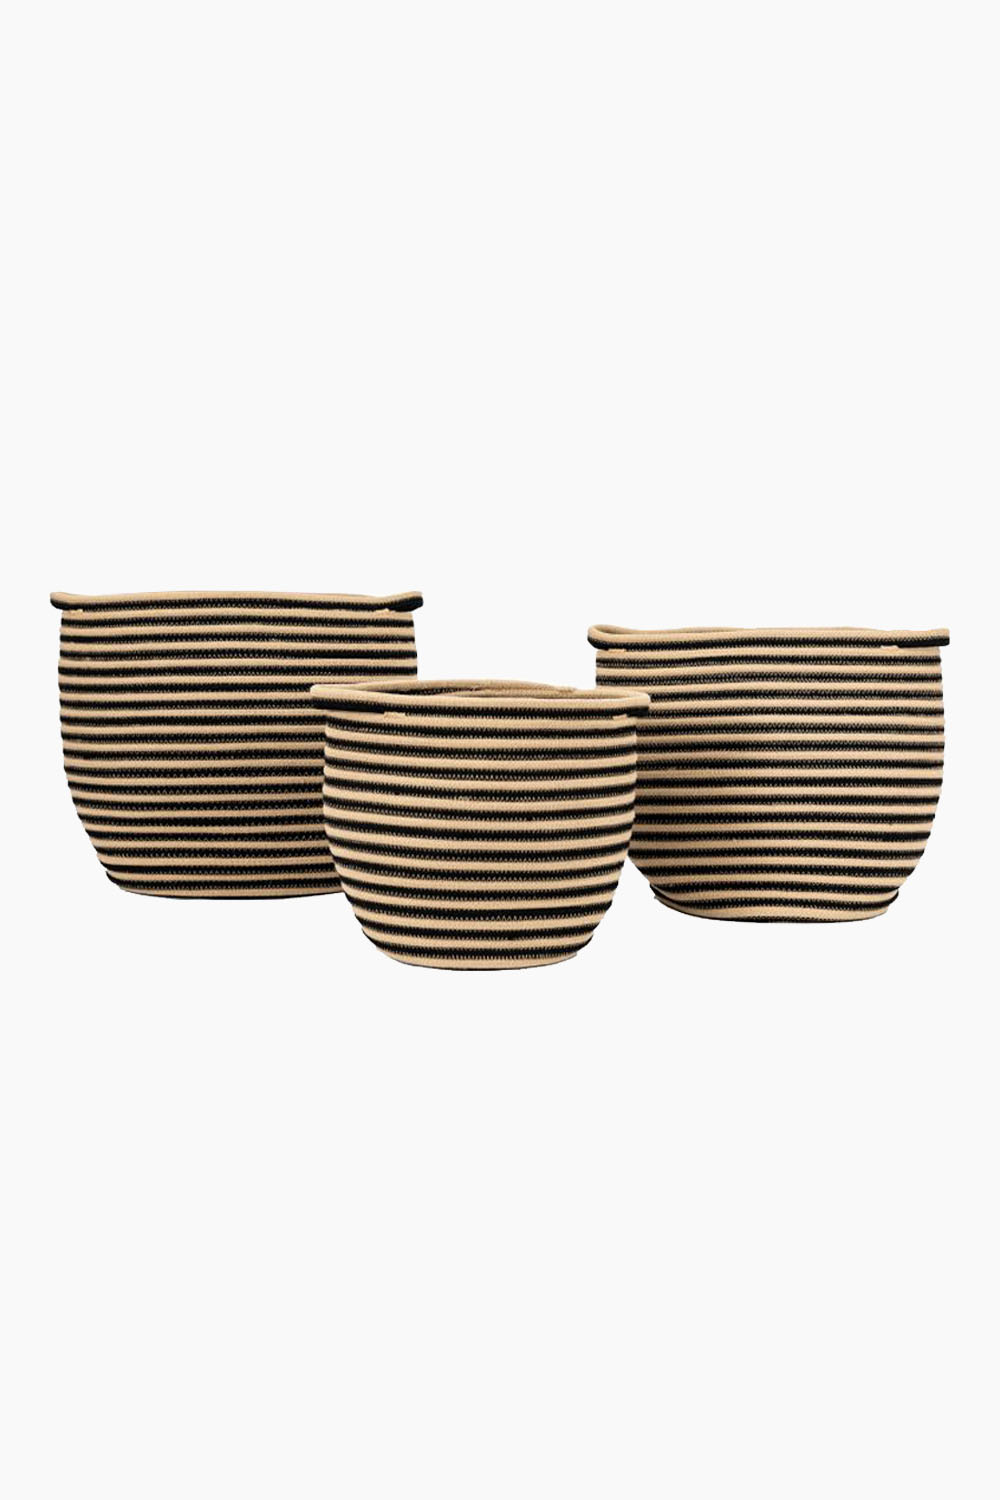 Rope Striped Baskets Set of 3